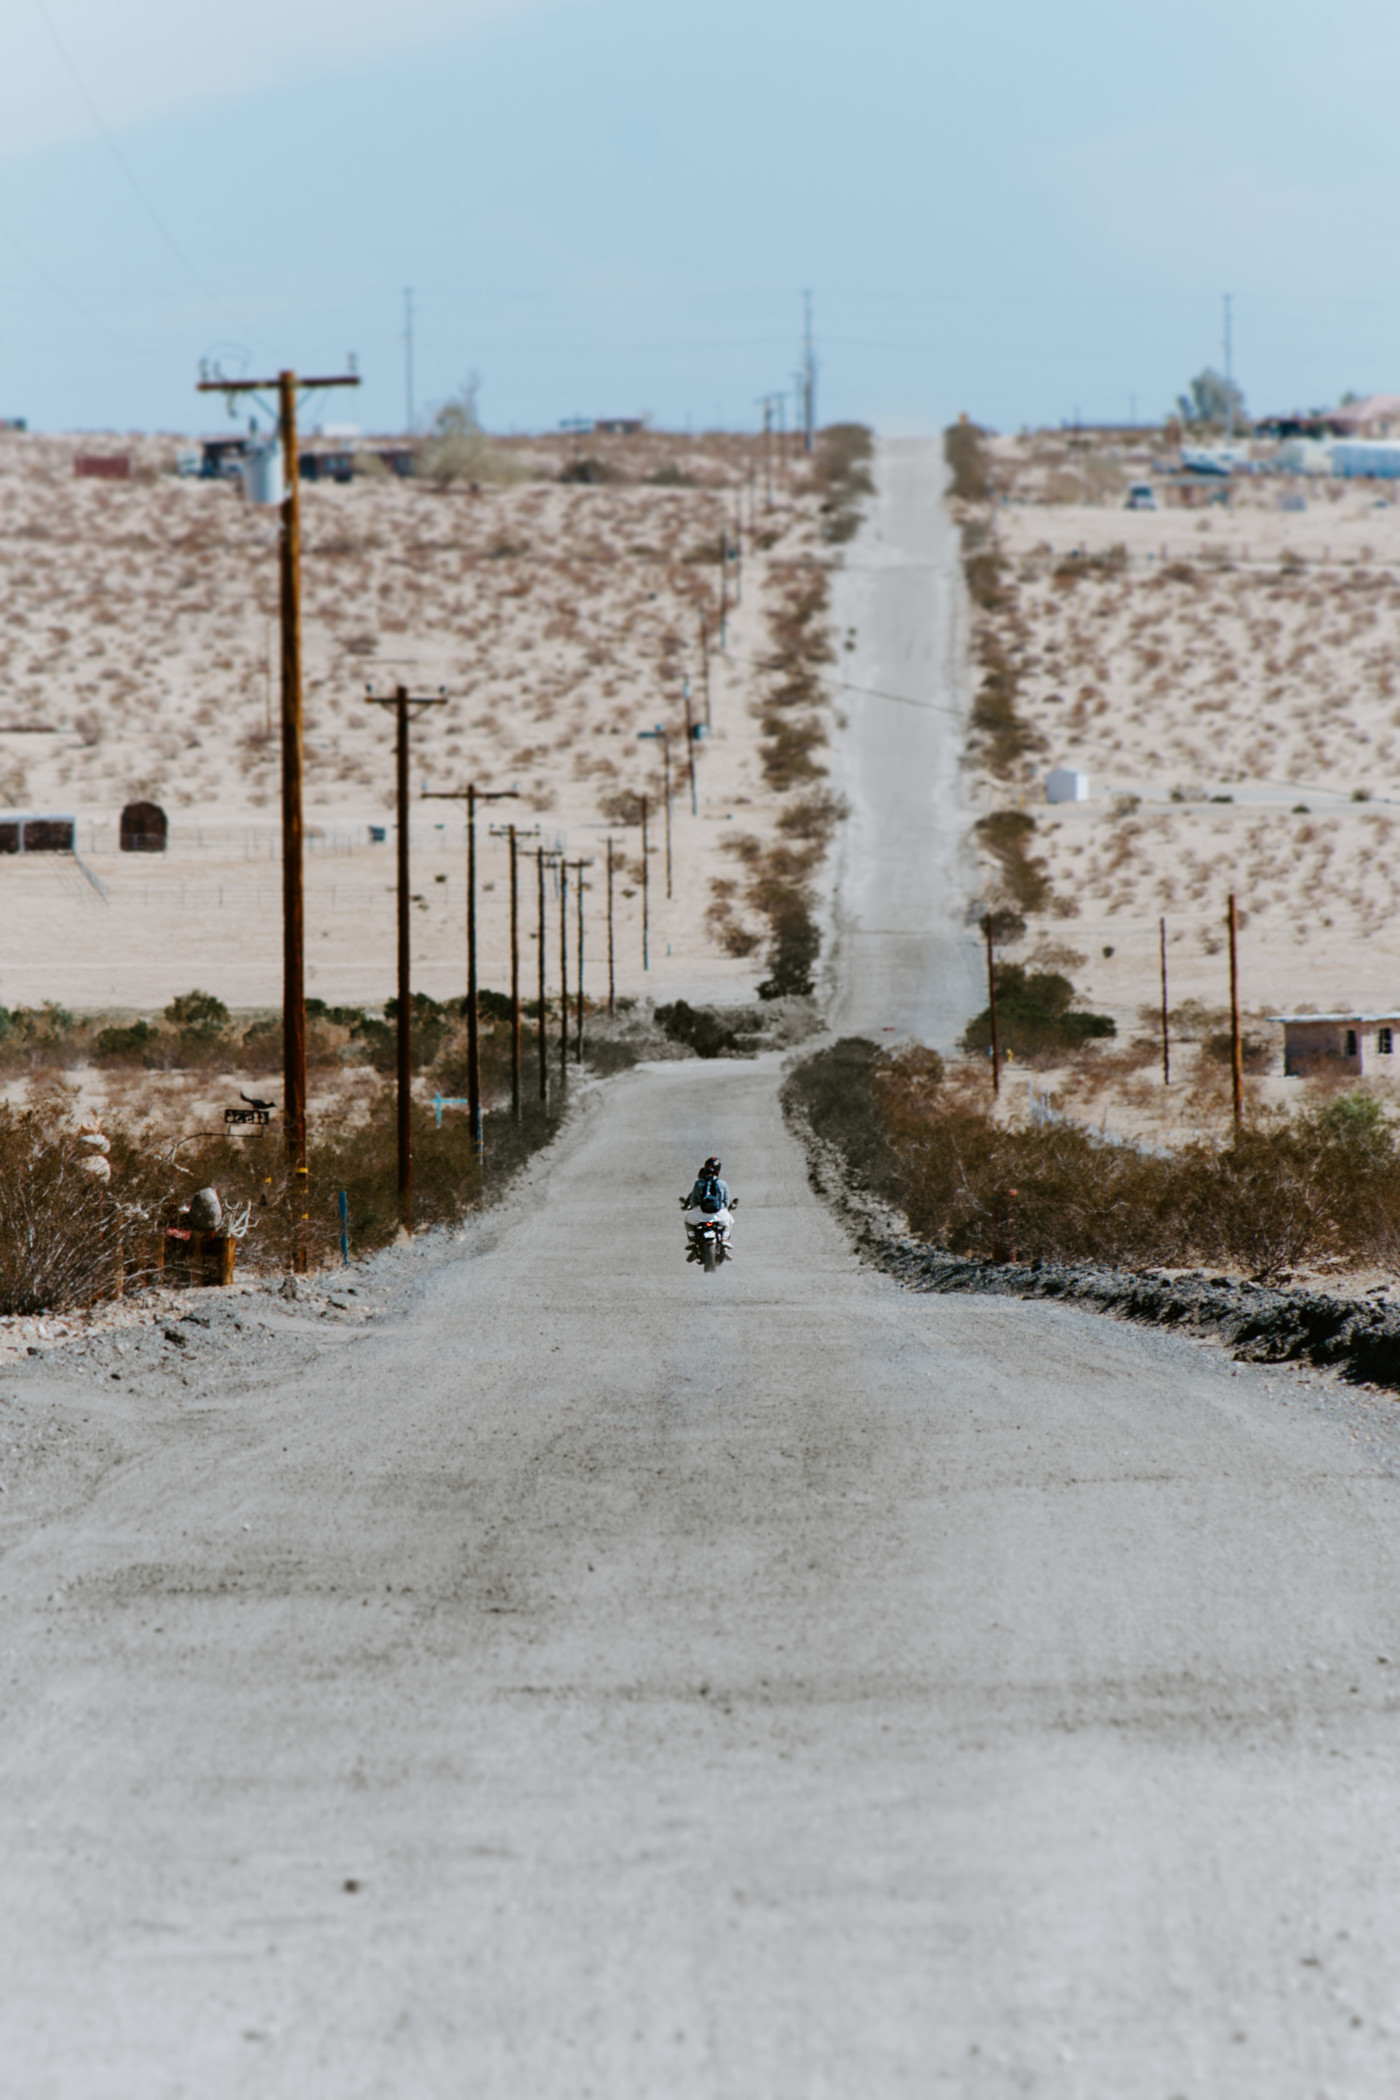 Madison and Becca ride off a long winding road in the Joshua Tree dessert on a motorcycle.